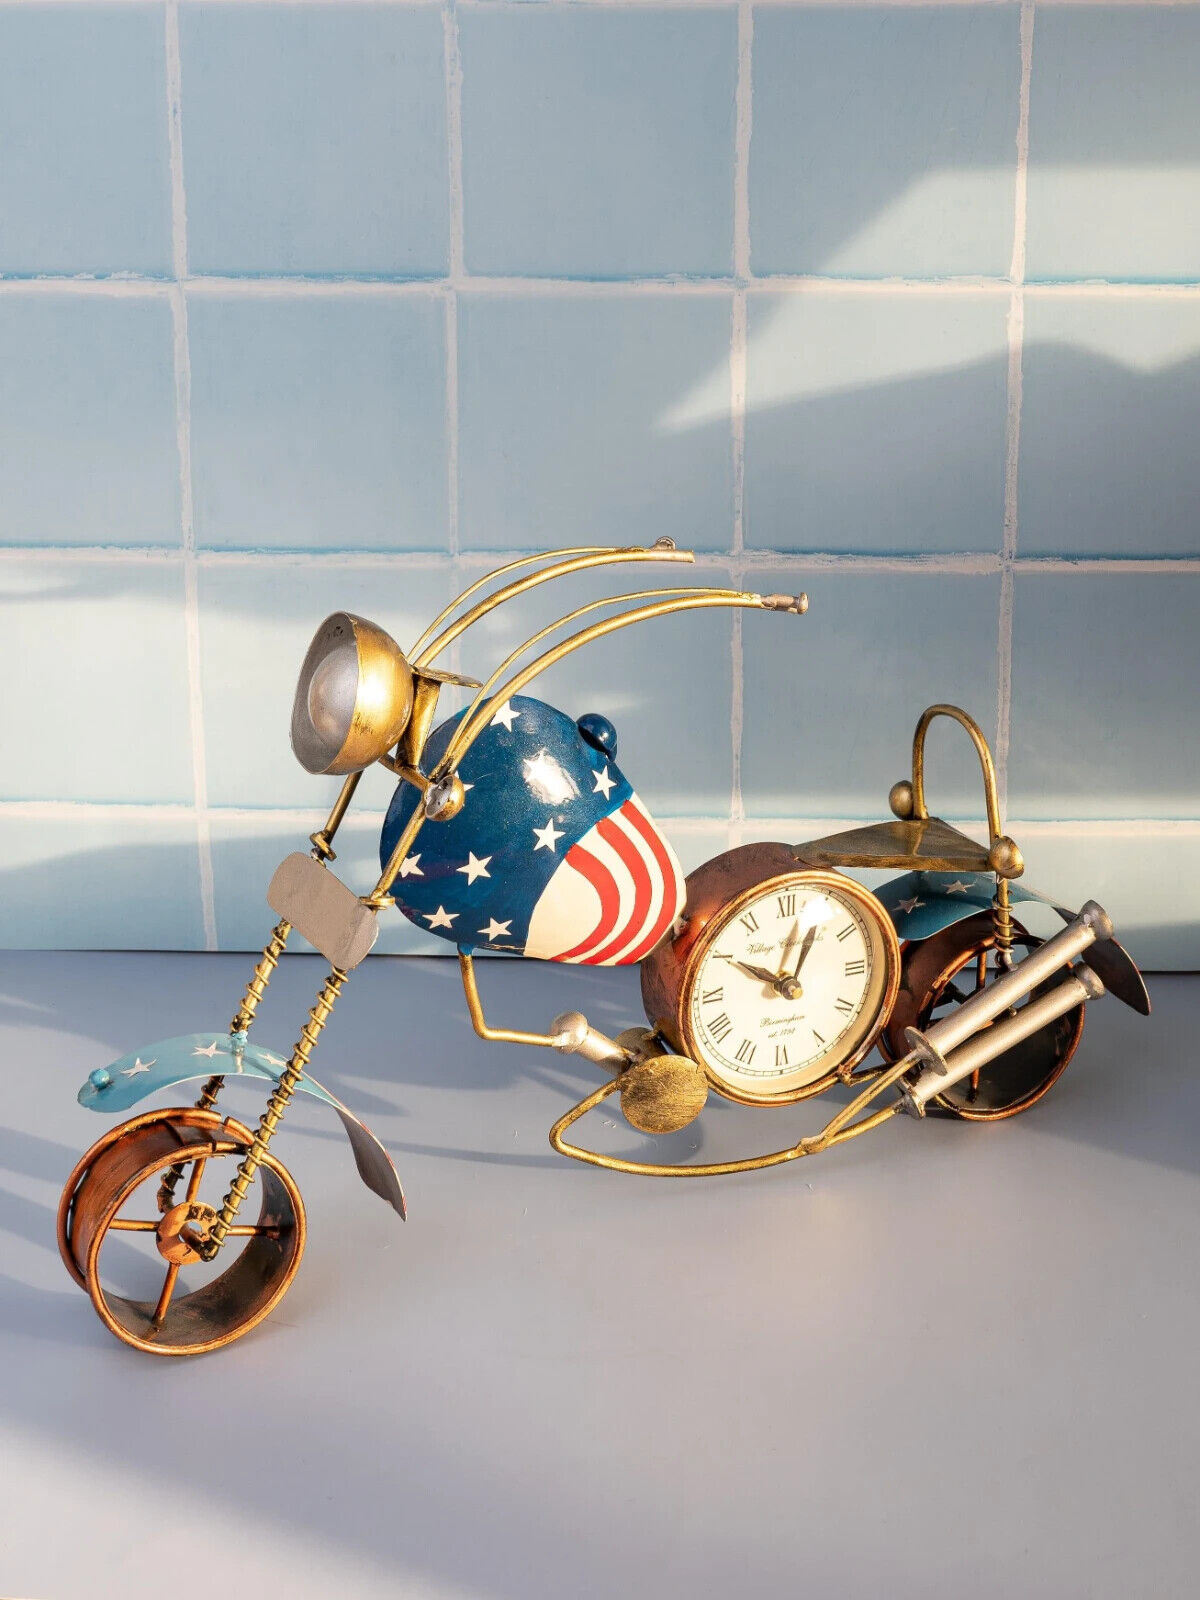 Metal Crafted Bike with Clock Decorative Showpiece - 20 inches